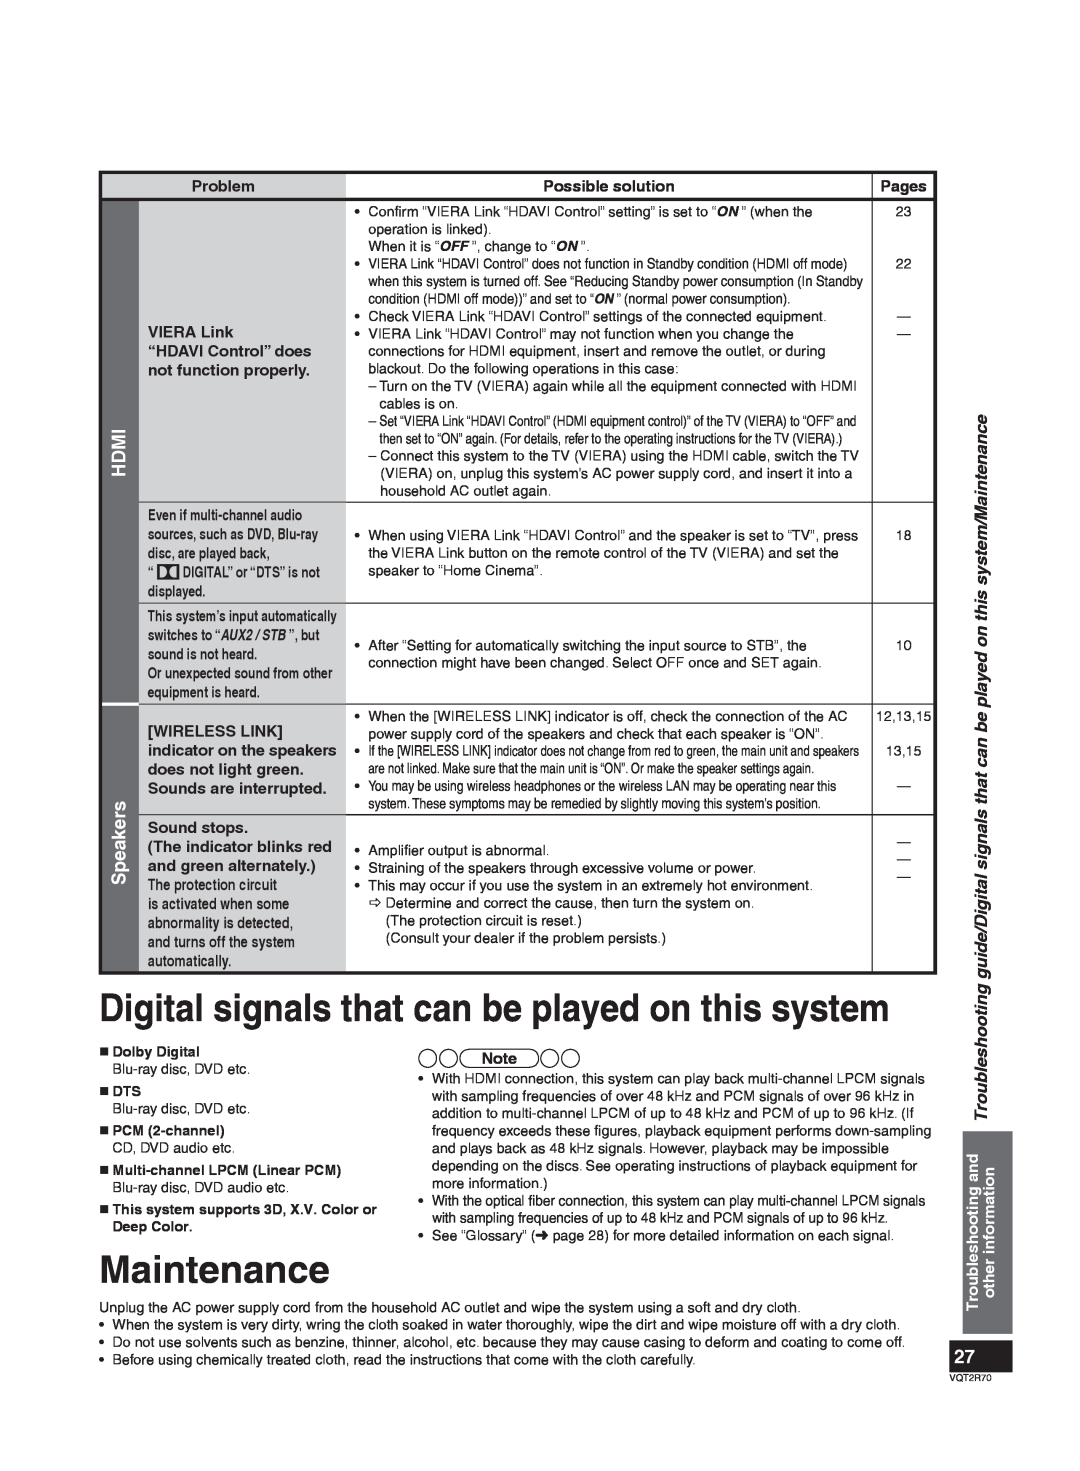 Panasonic SC-ZT2 warranty Digital signals that can be played on this system, Maintenance 